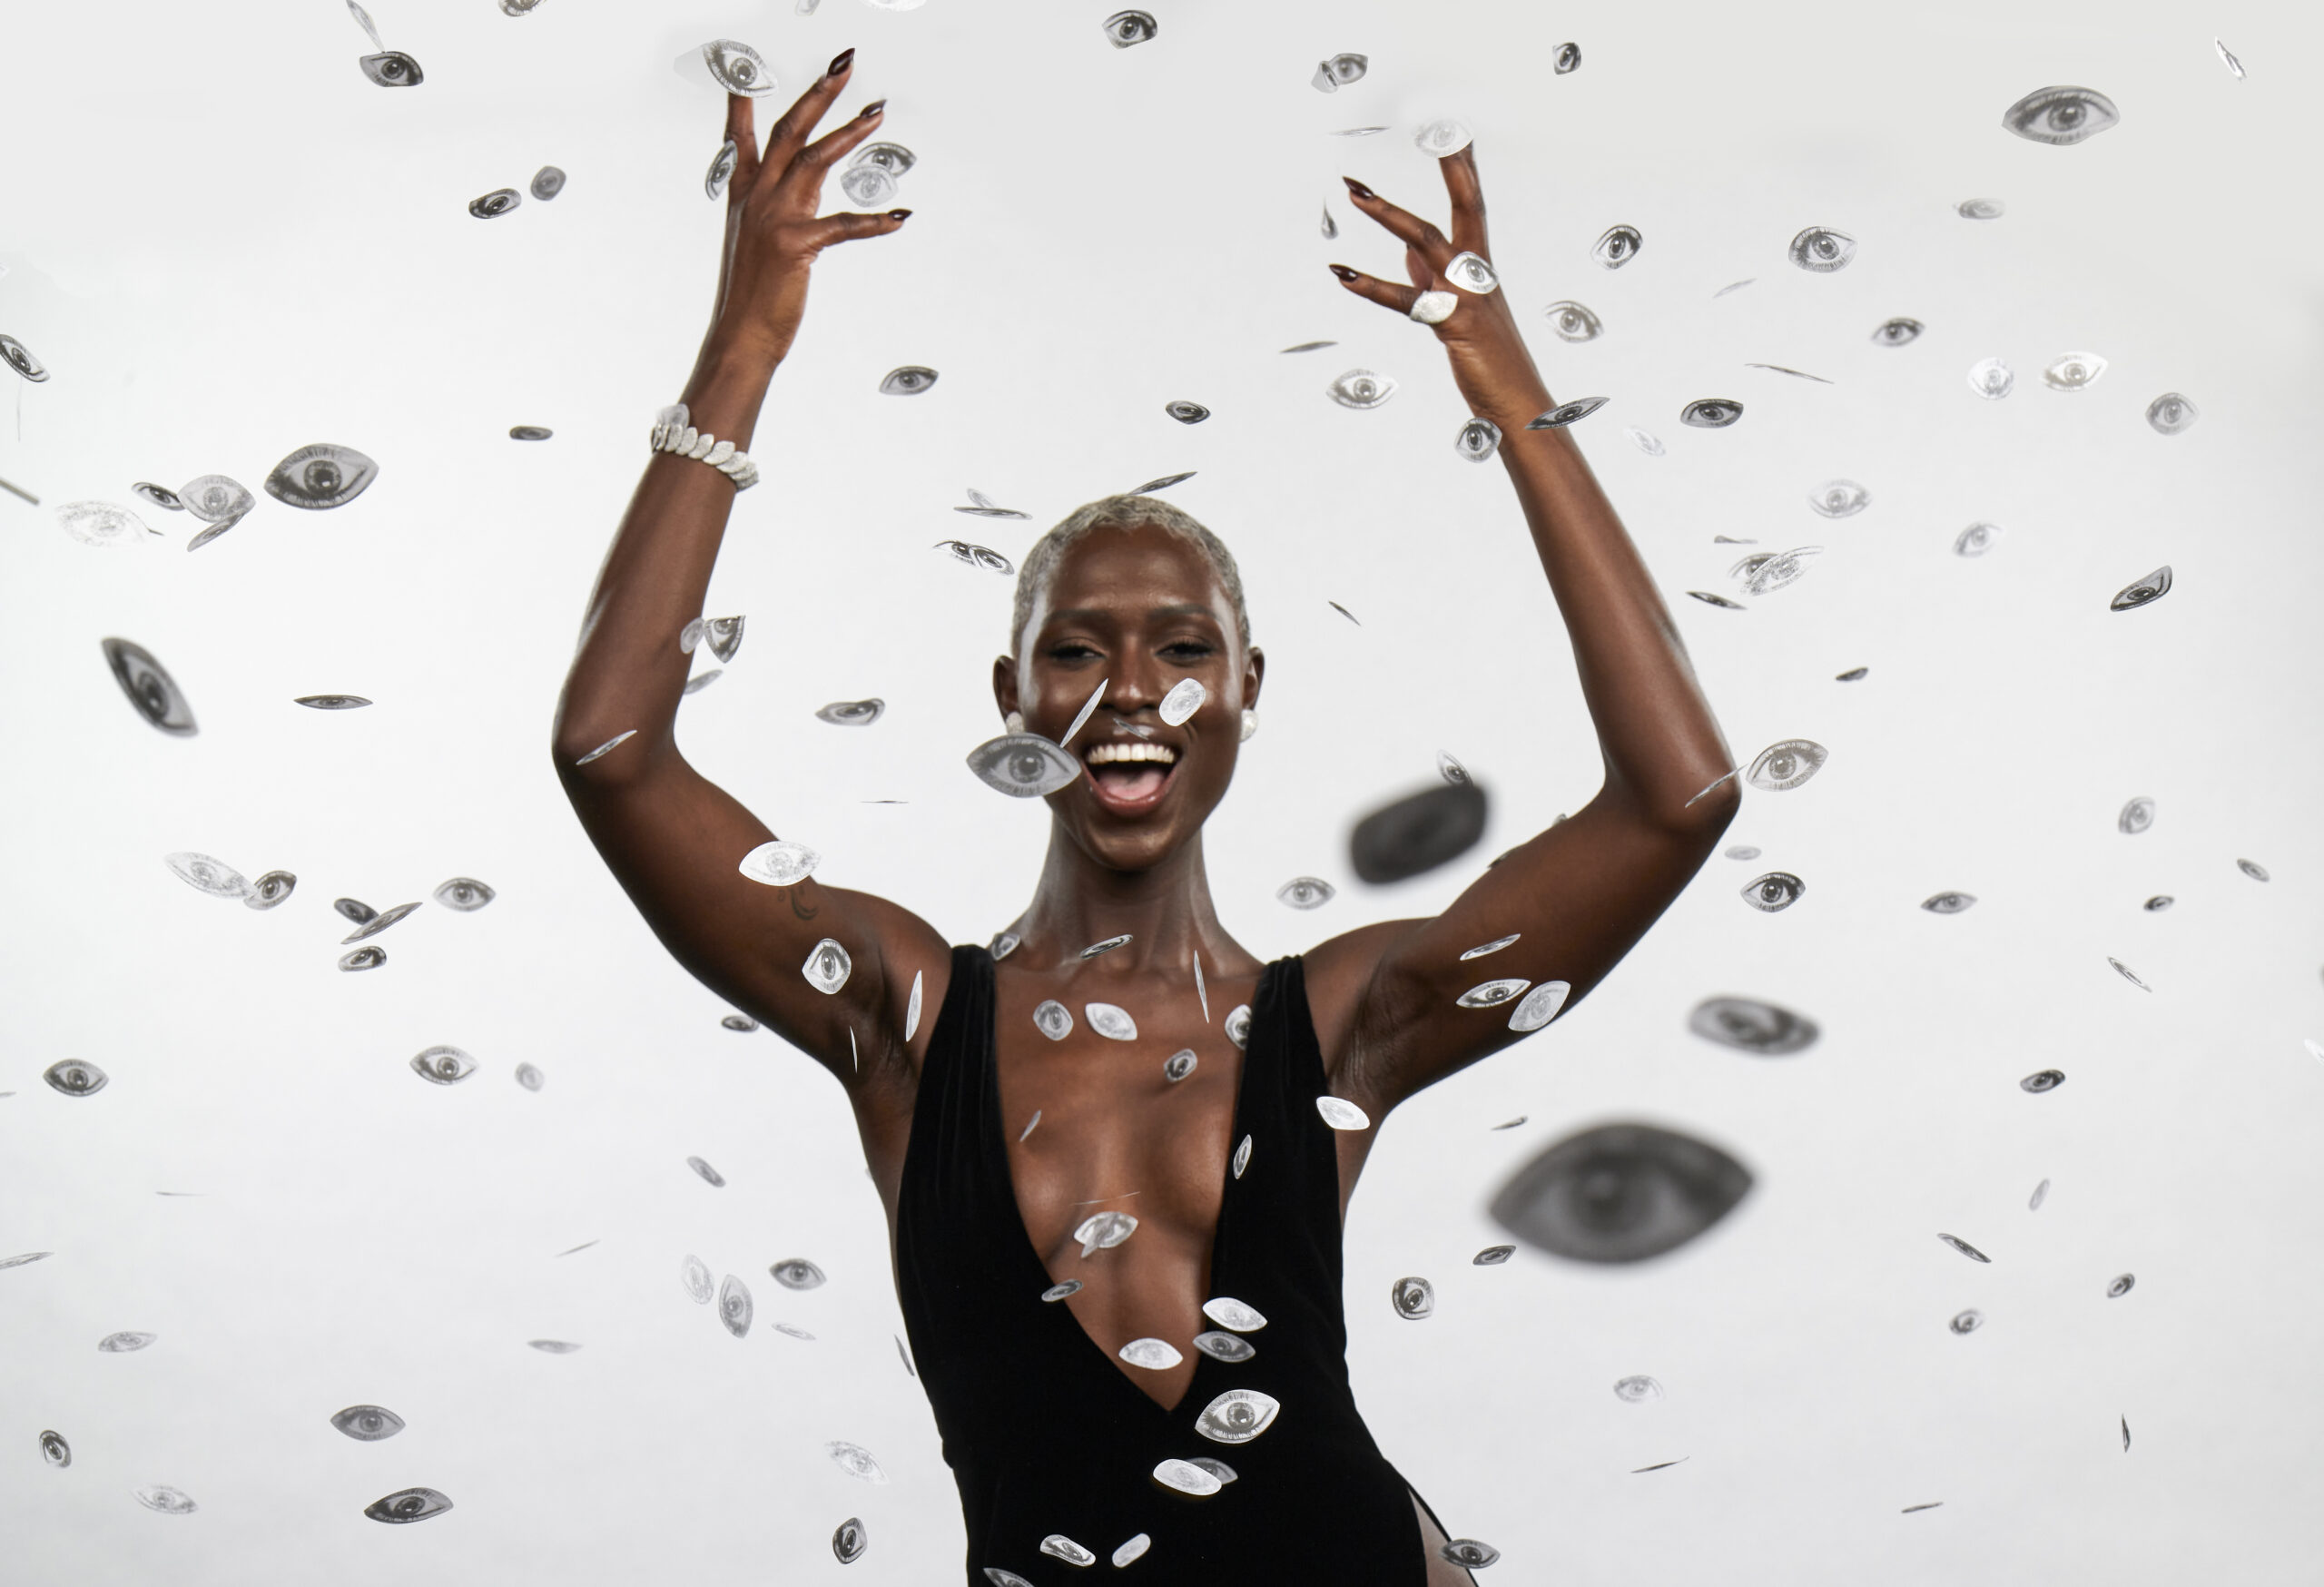 Jodie Turner-Smith joyously throws her arms up, surrounded by a shower of silver confetti coins, capturing a moment of celebration and exuberance at an Oscars' after-party.